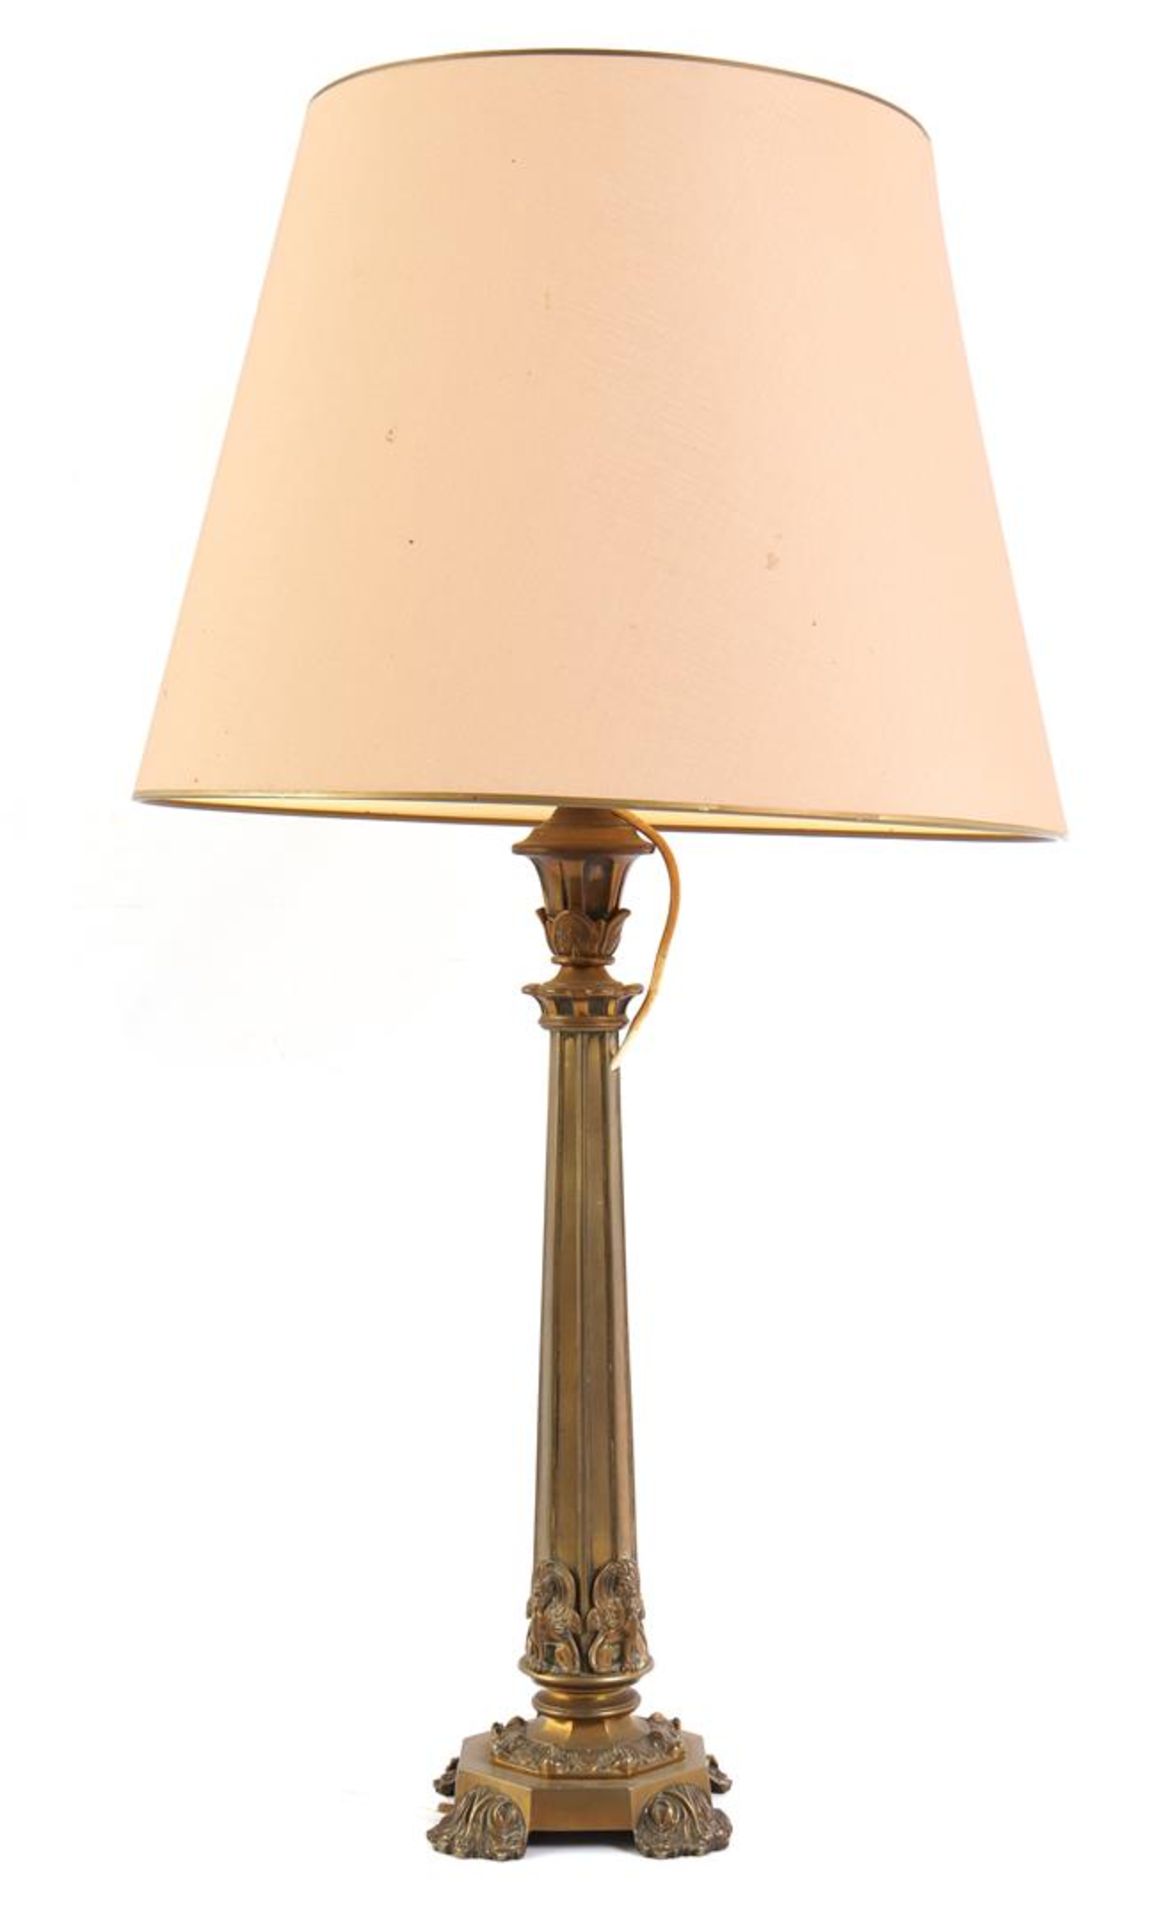 Classic brass table table lamp with upholstered shade